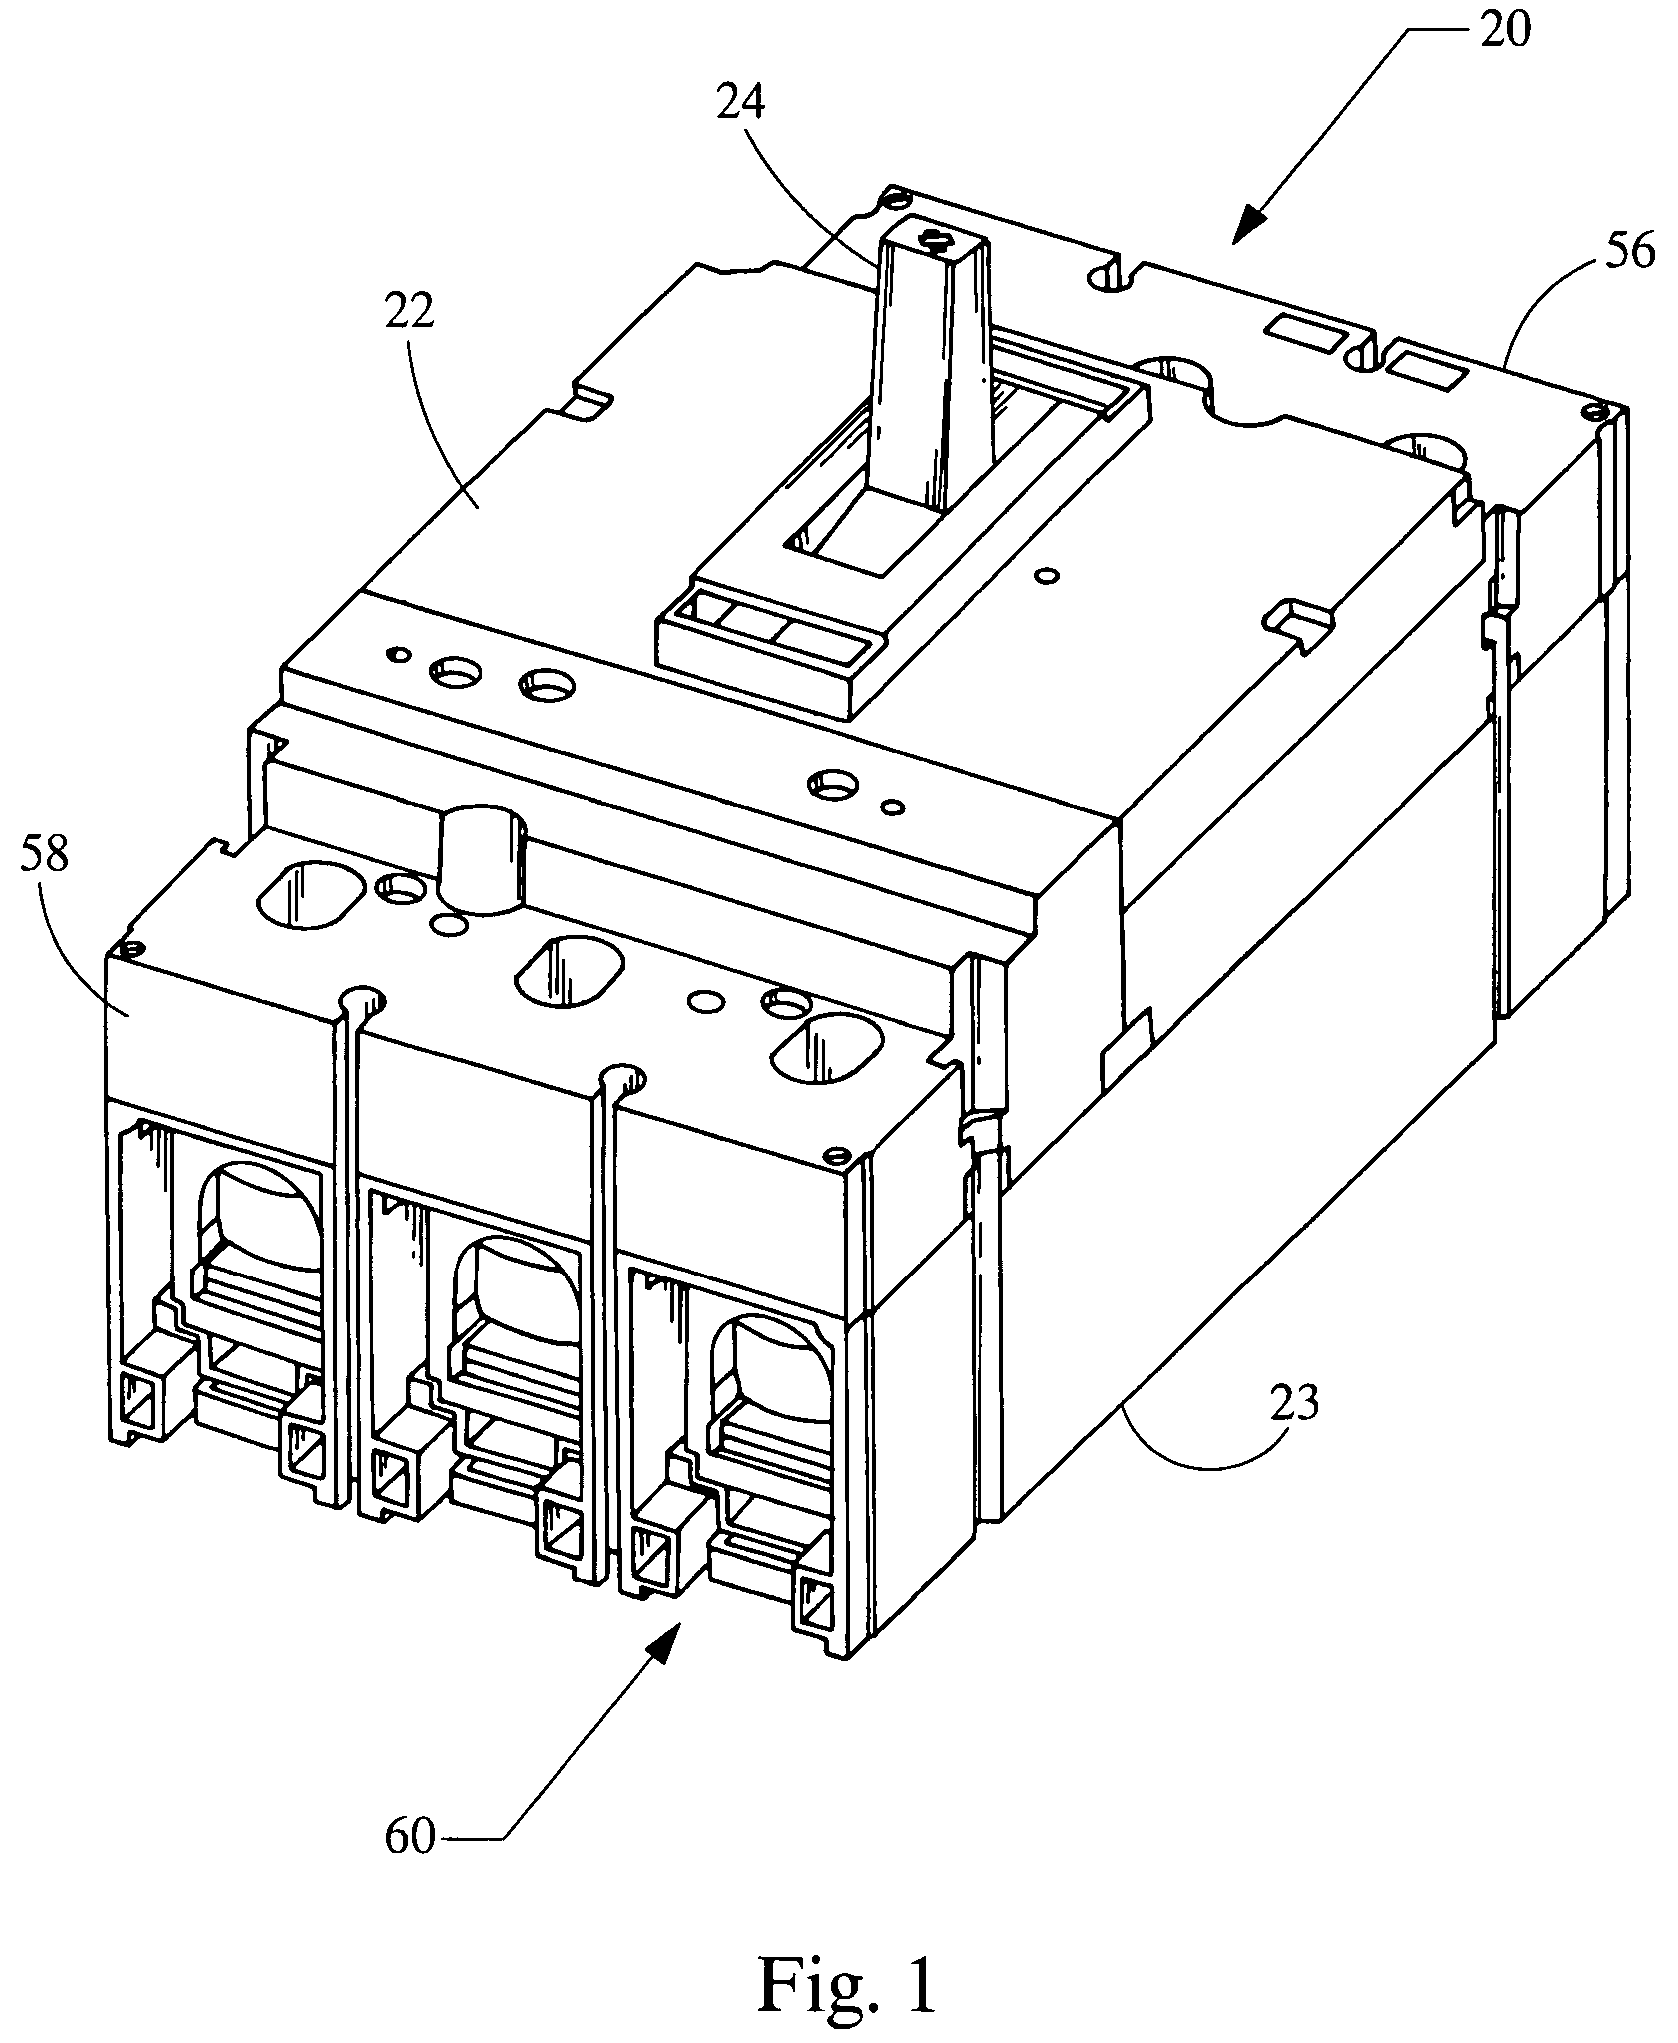 Terminal support for a circuit breaker trip unit